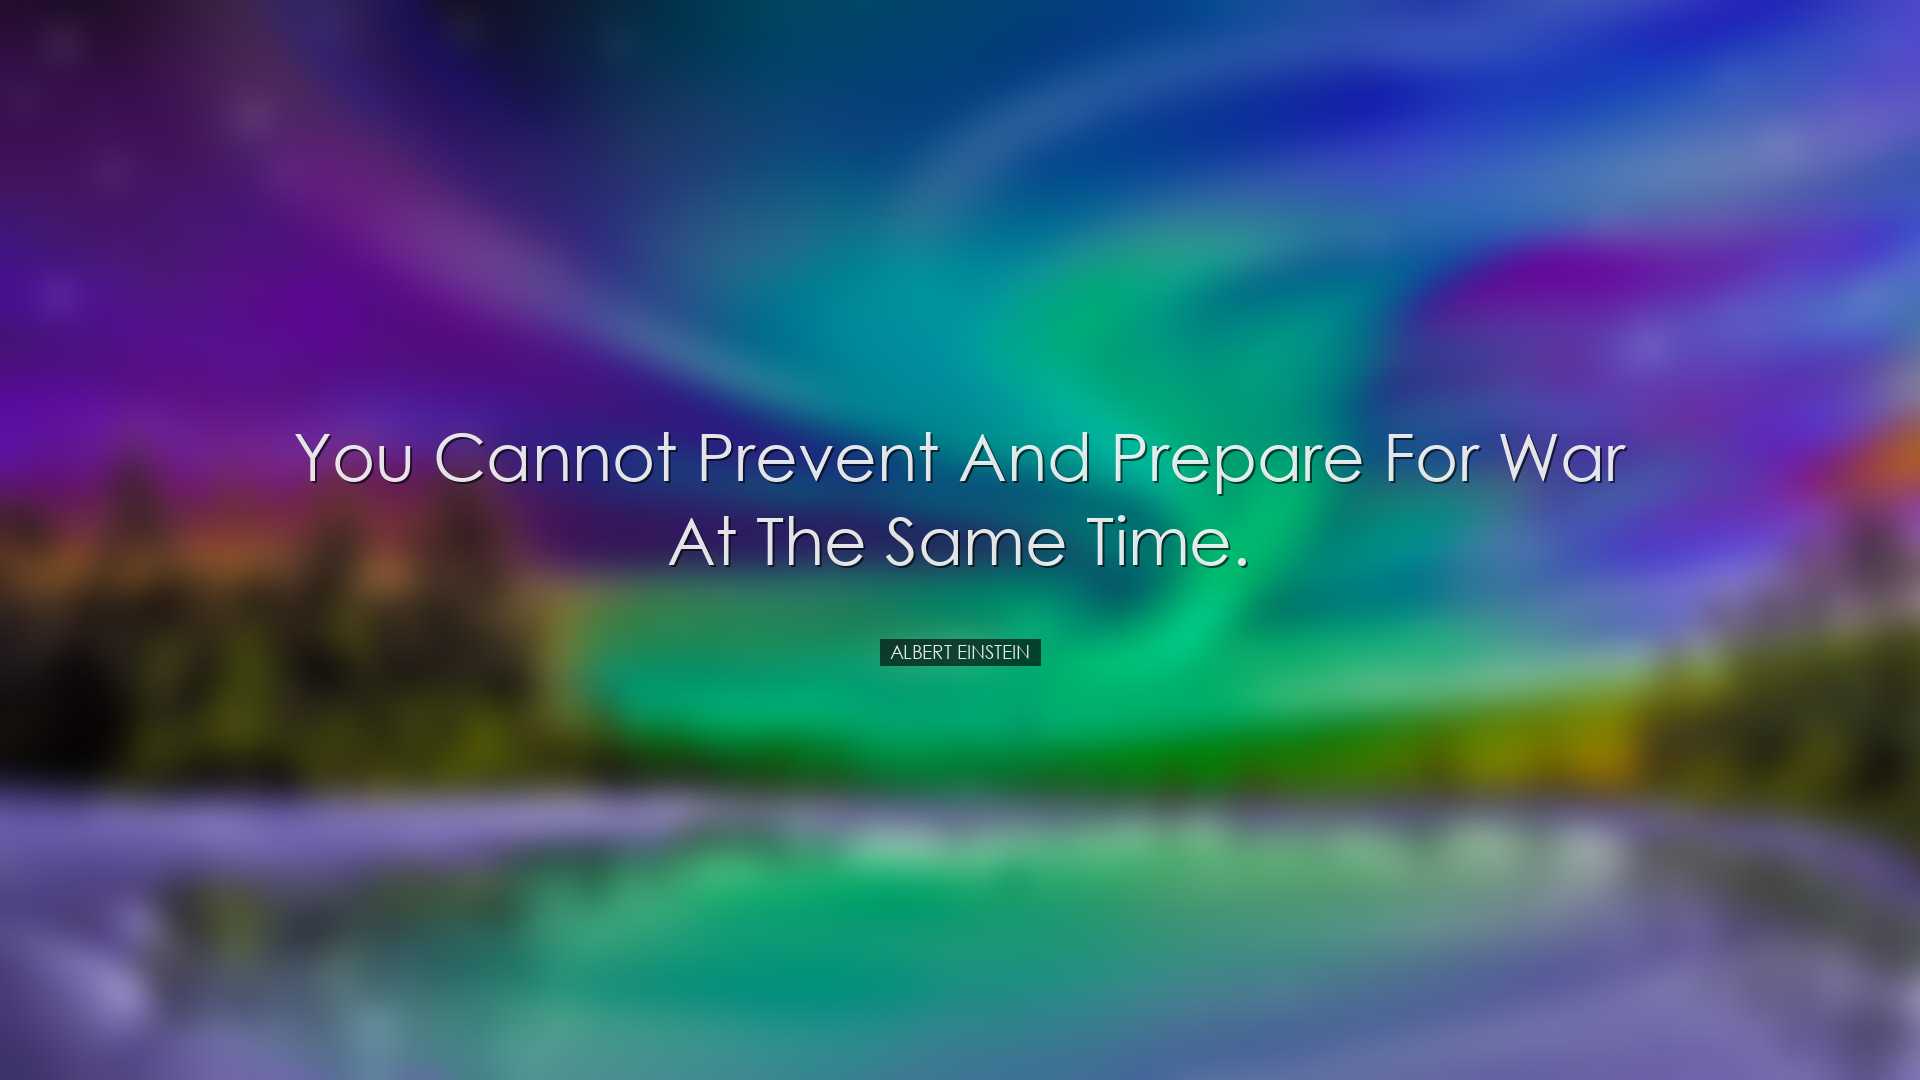 You cannot prevent and prepare for war at the same time. - Albert